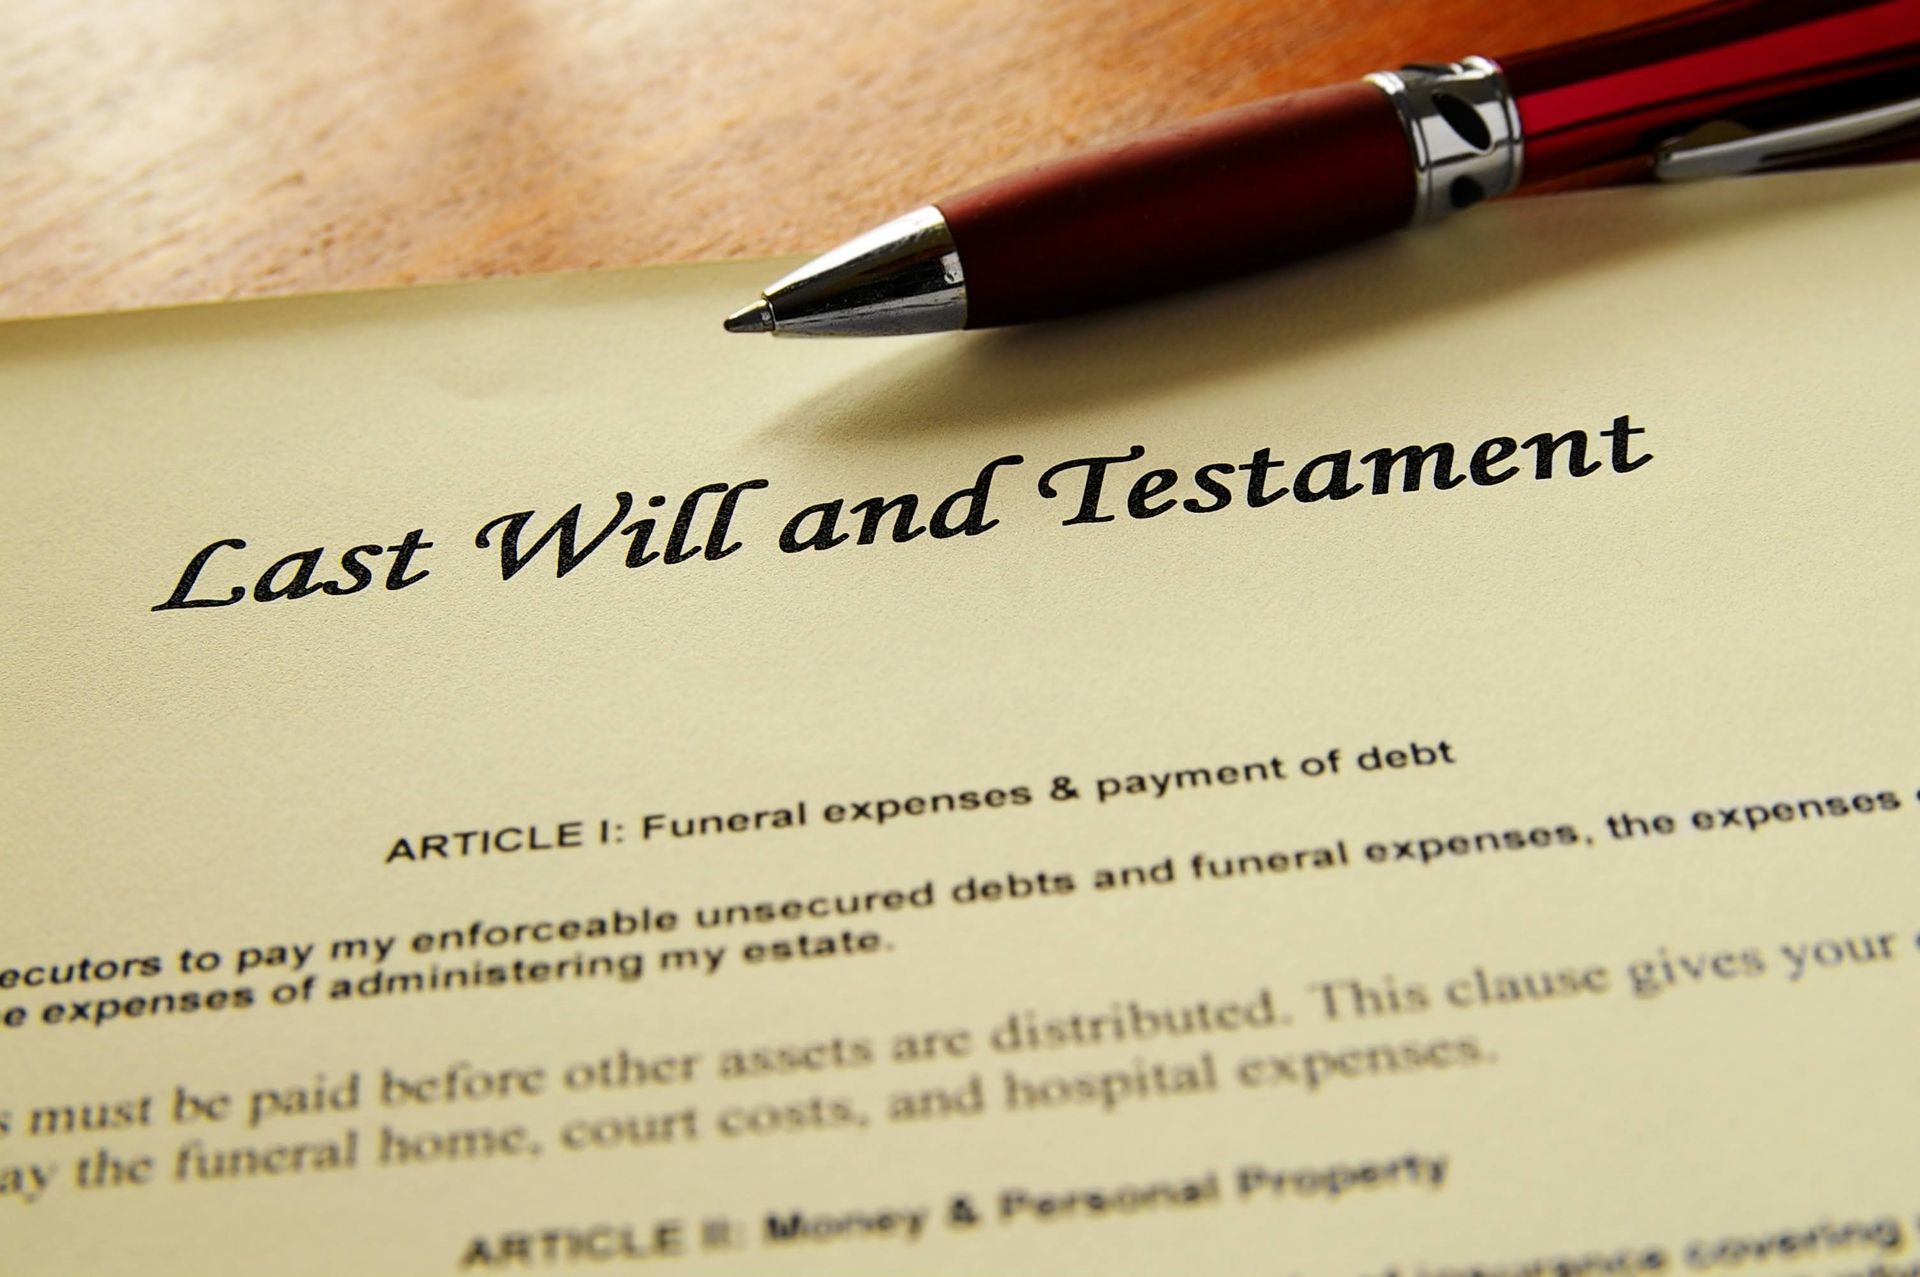 Last Will and Testament - Aiken, South Carolina - Maxwell Law Firm